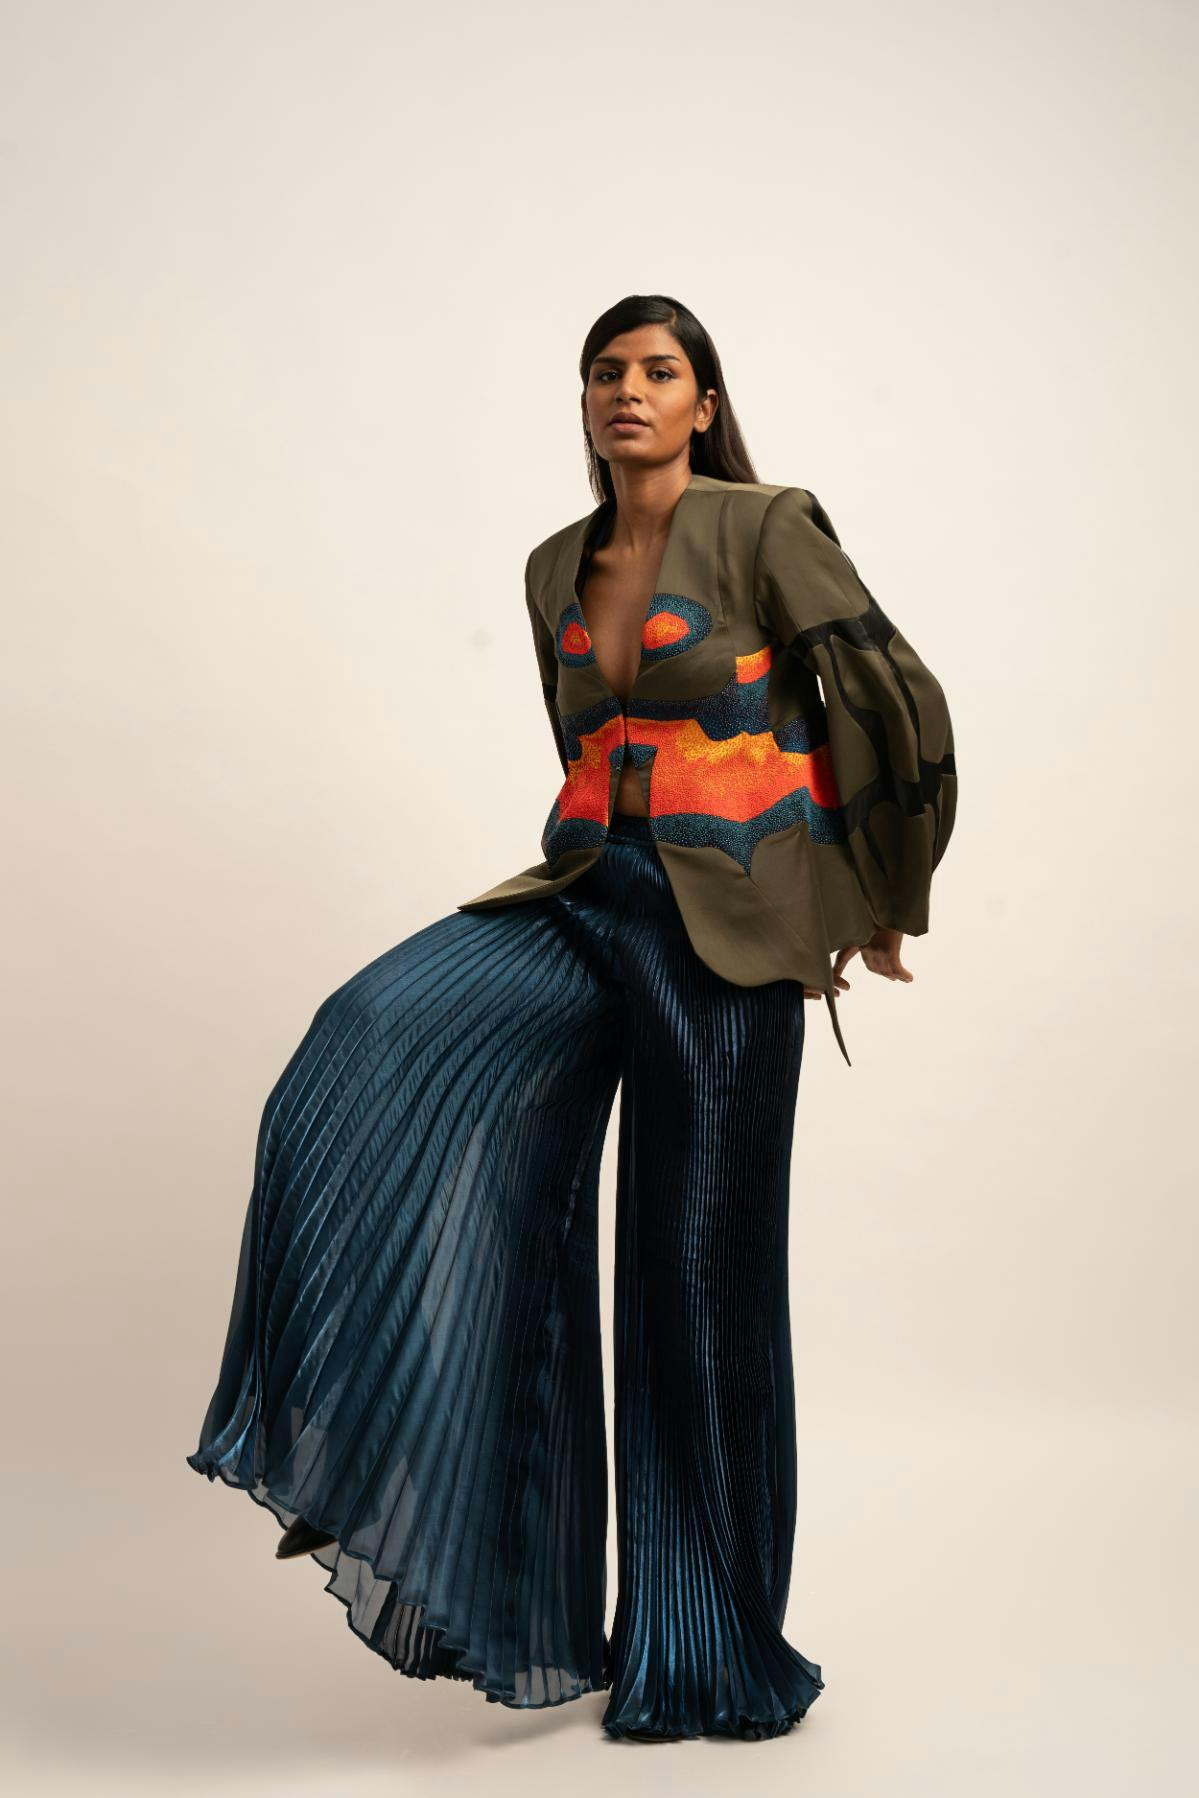 The Luminous Pleated Trousers, a product by Siddhant Agrawal Label